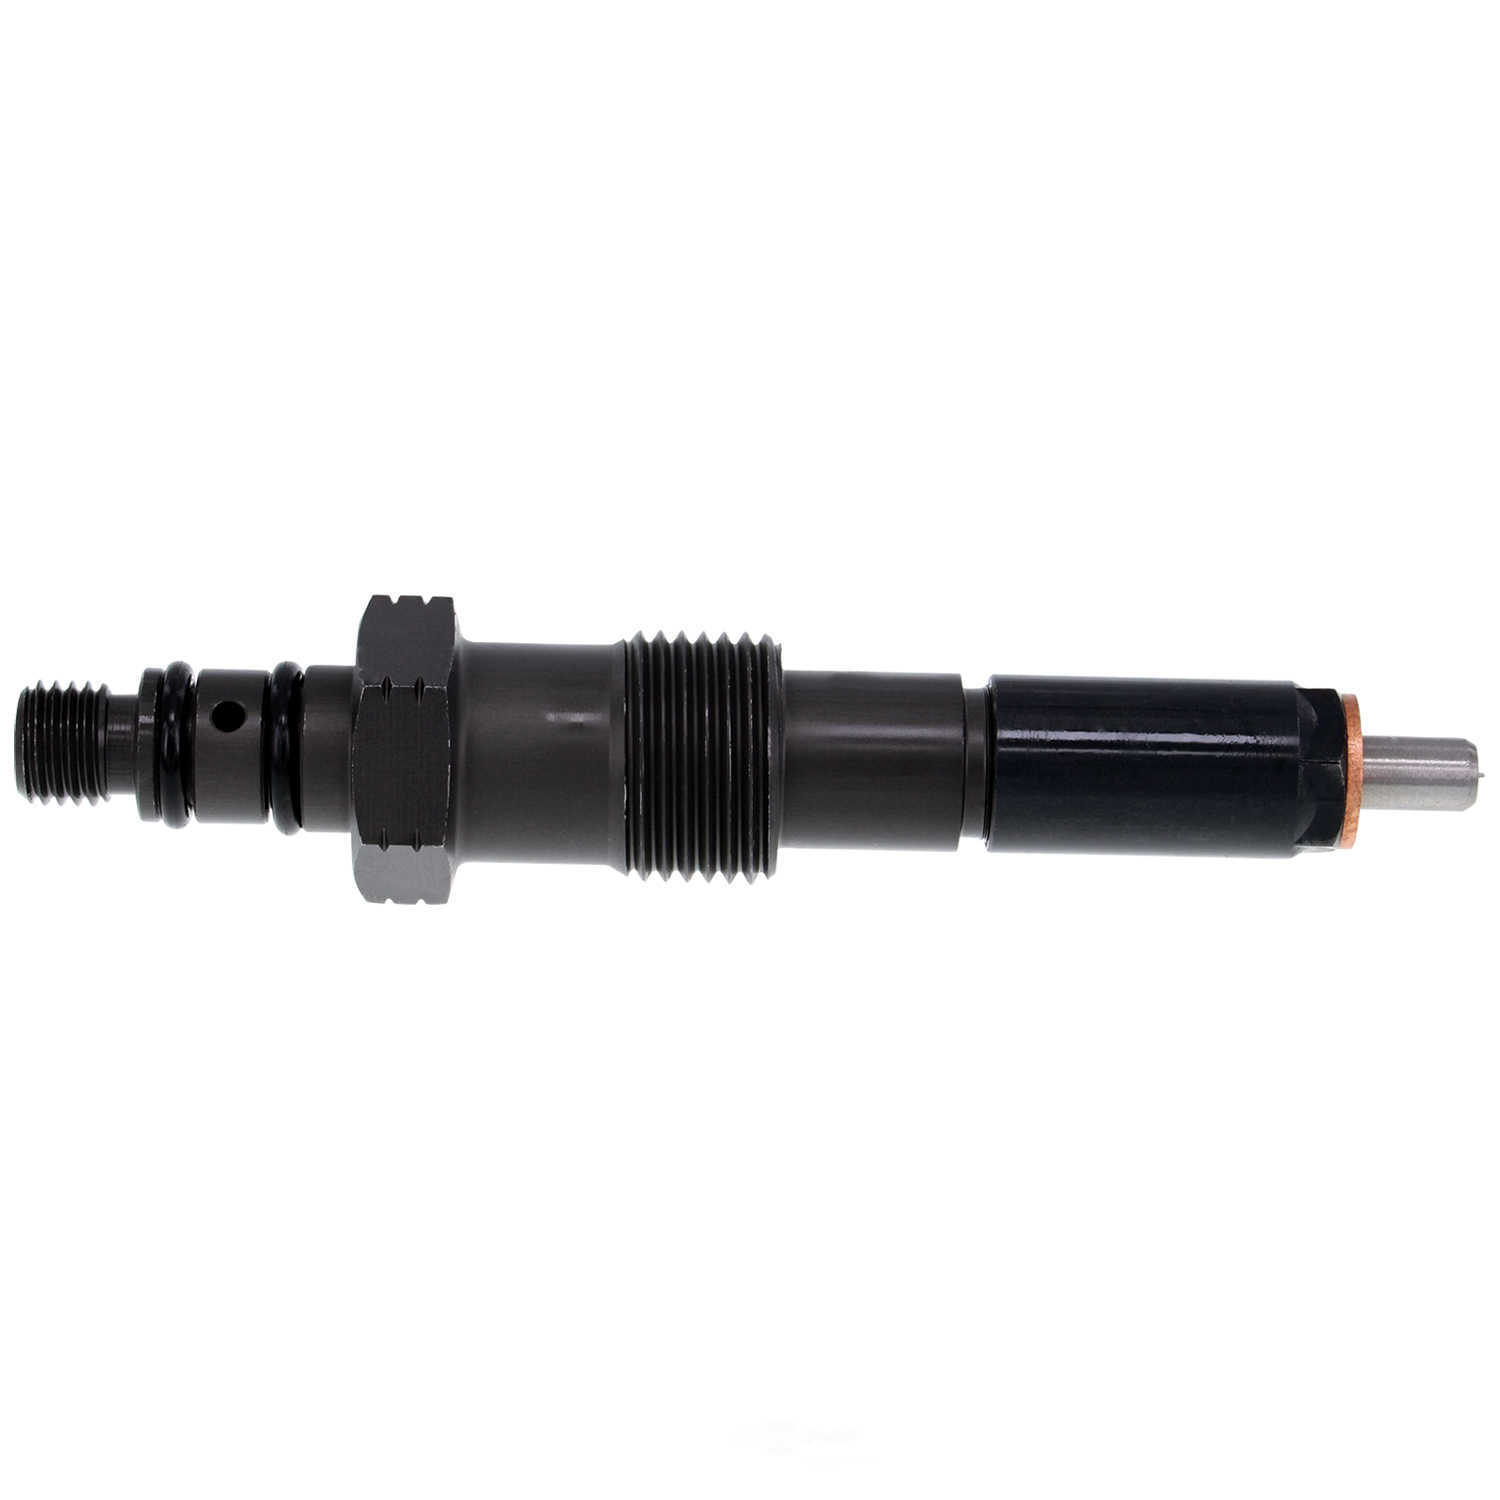 GB REMANUFACTURING INC. - New Diesel Fuel Injector - GBR 621-101